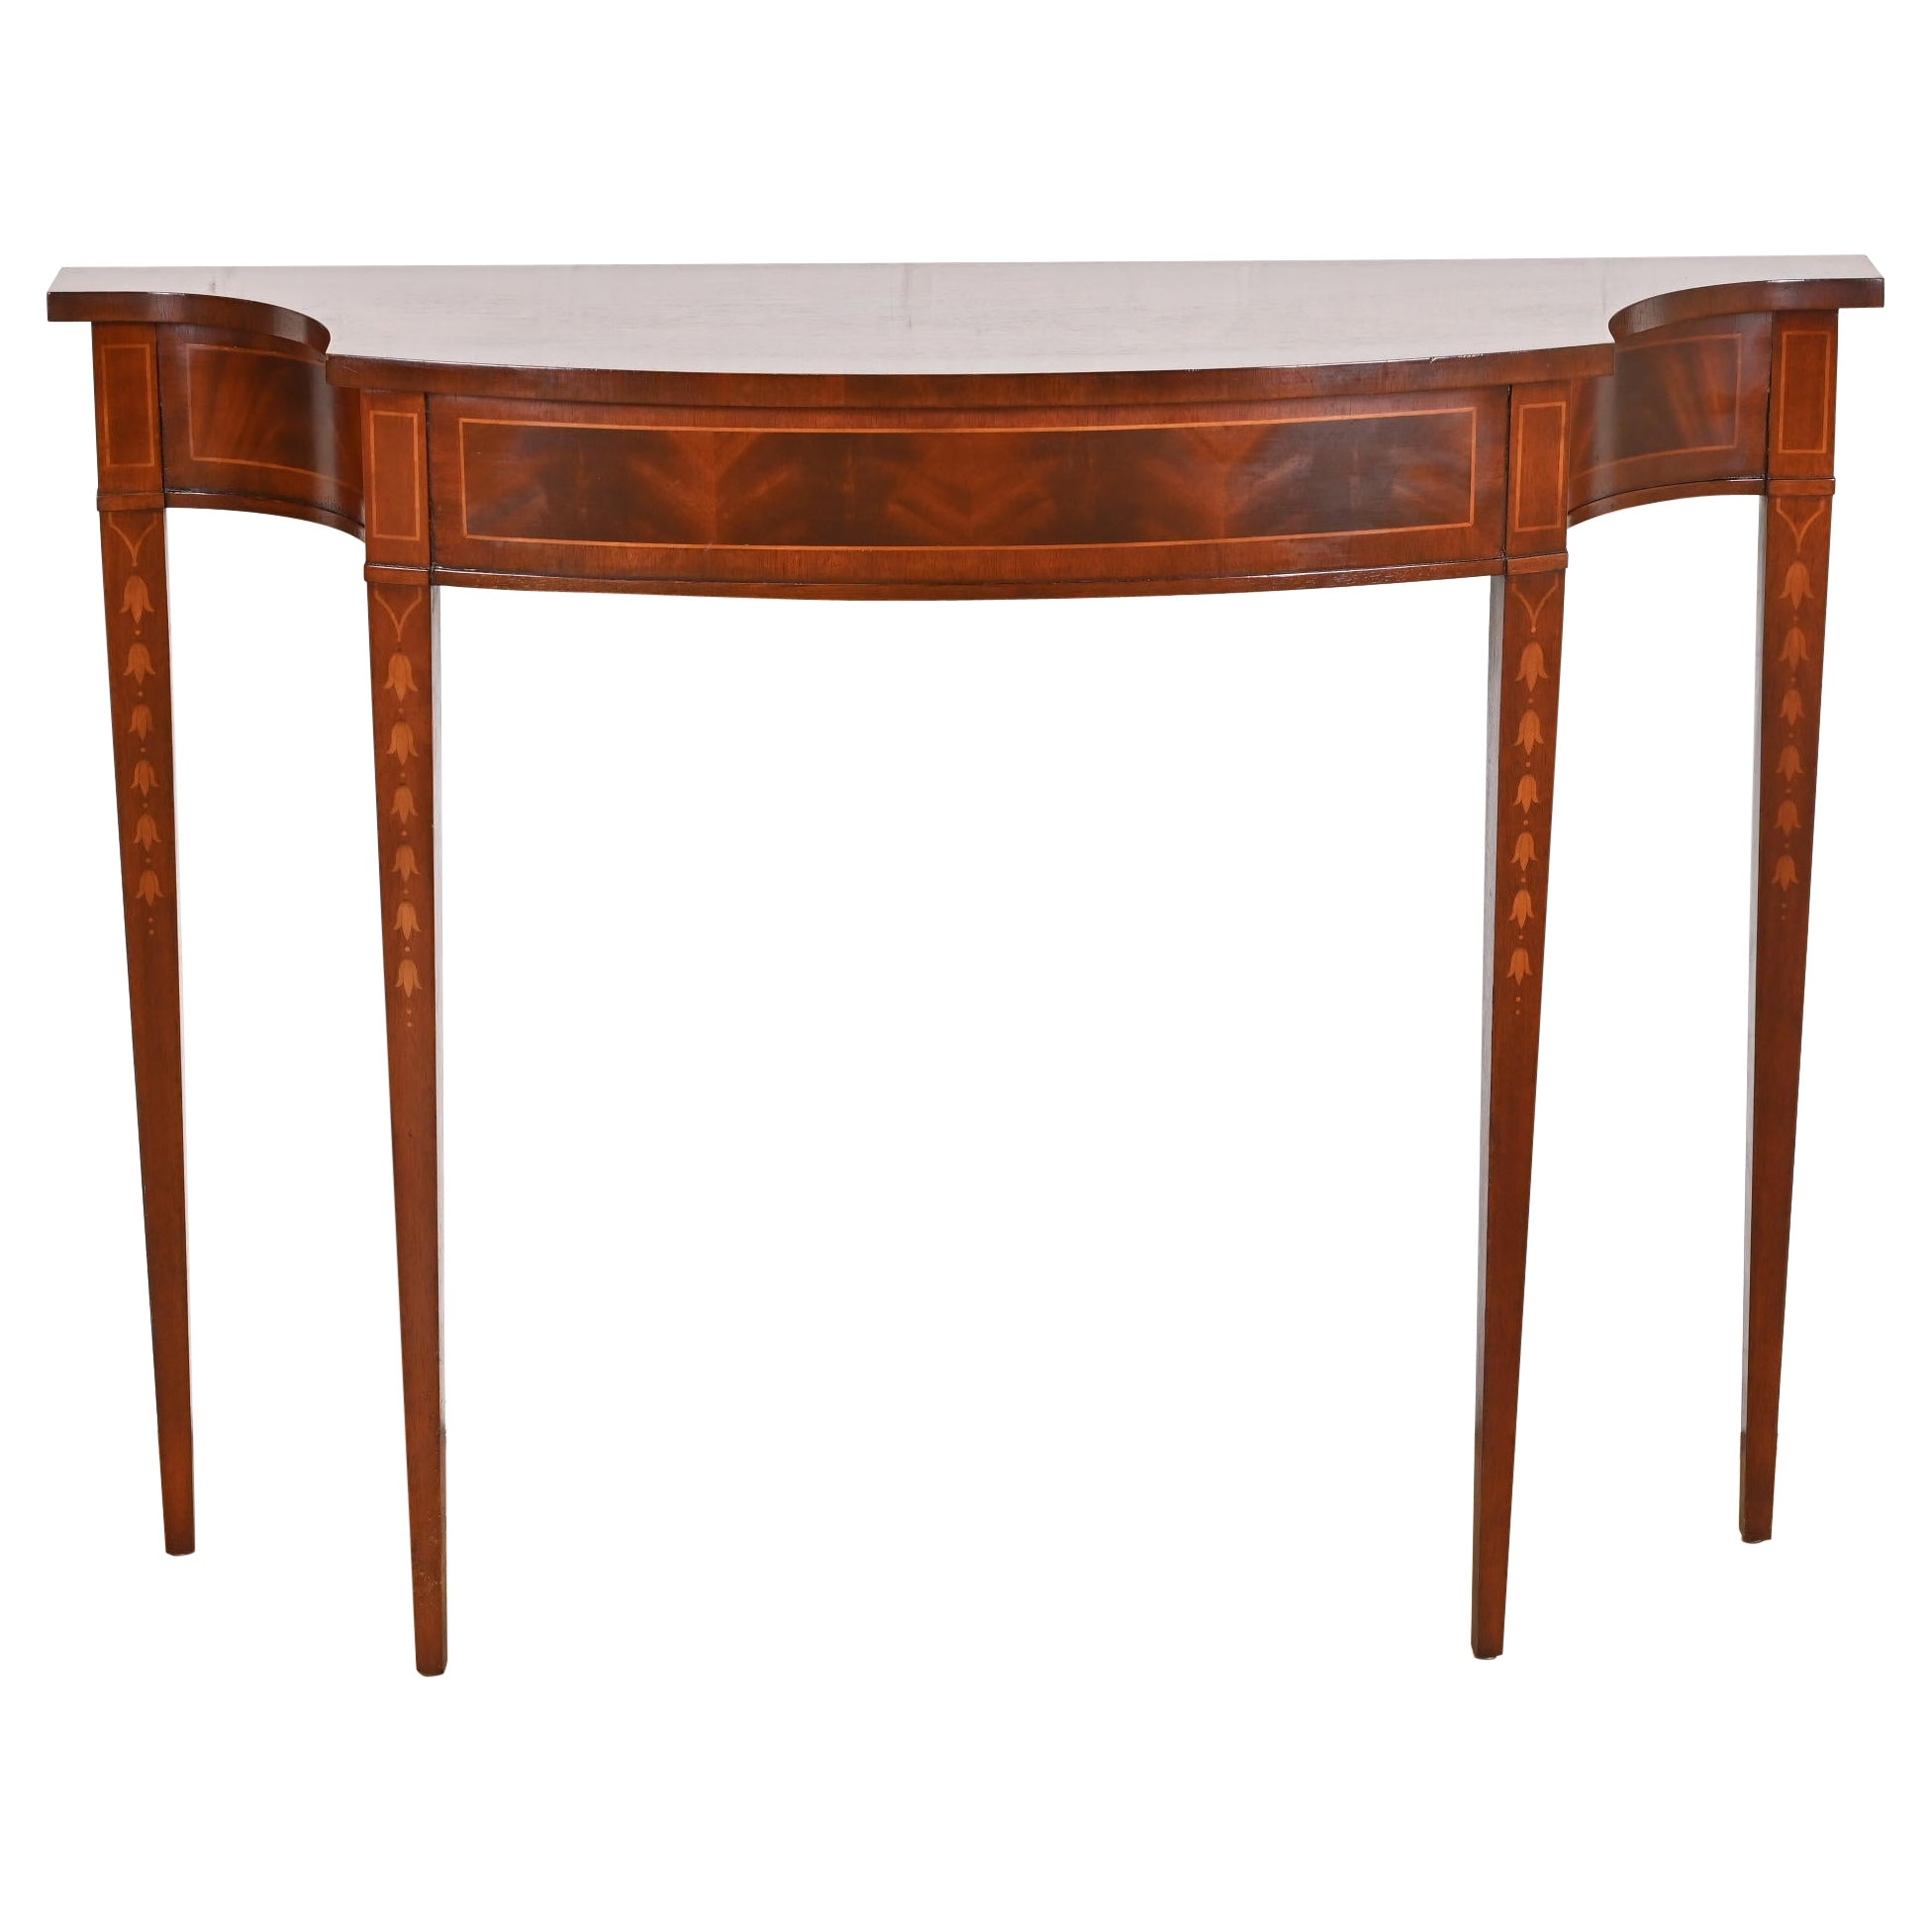 Wellington Hall Federal Inlaid Flame Mahogany Console or Entry Table For Sale